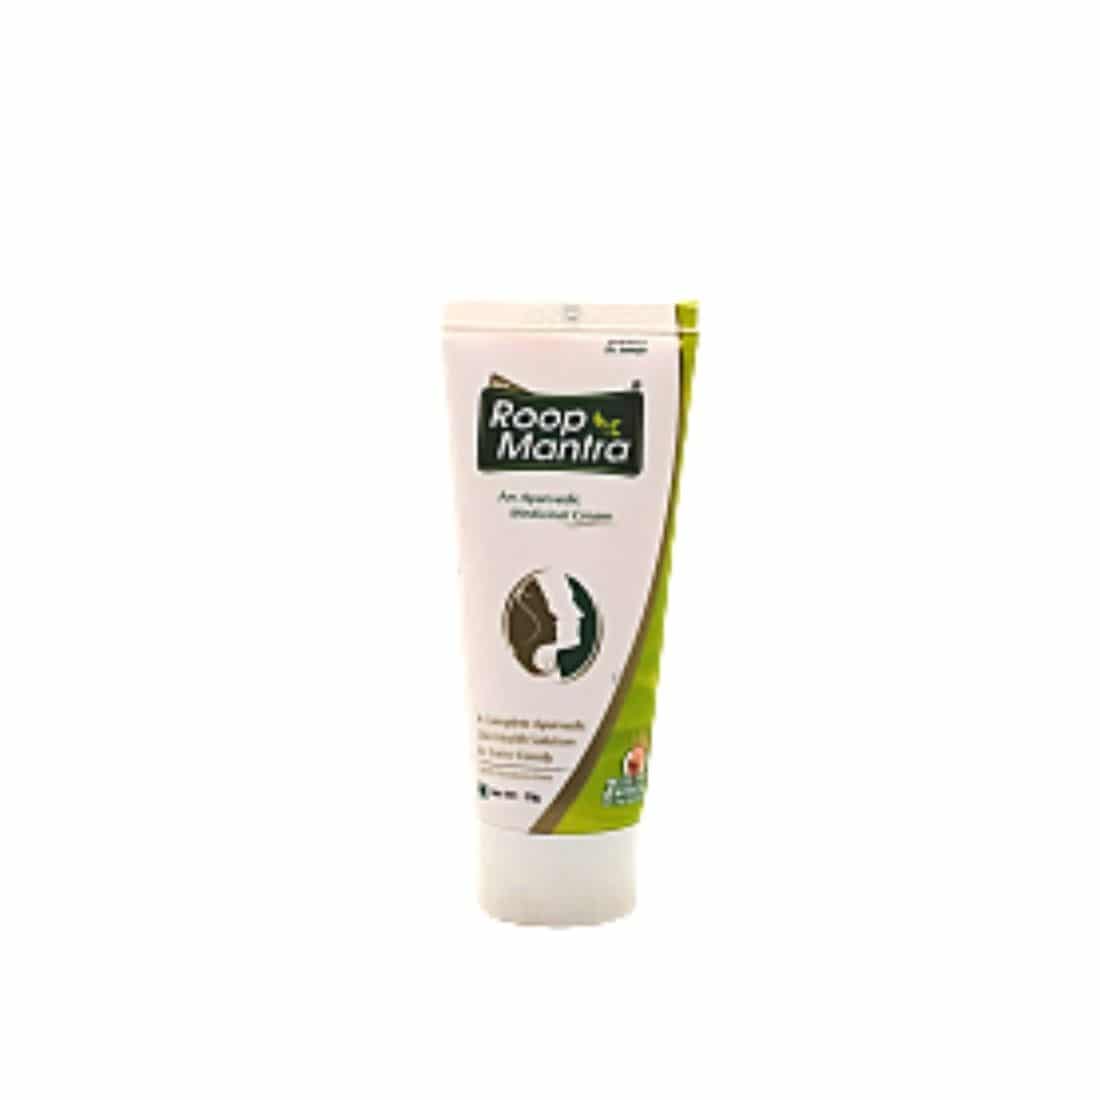 Roop mantra cream preserved the core of Natural and Ayurvedic to prepare the products for natural skin care.